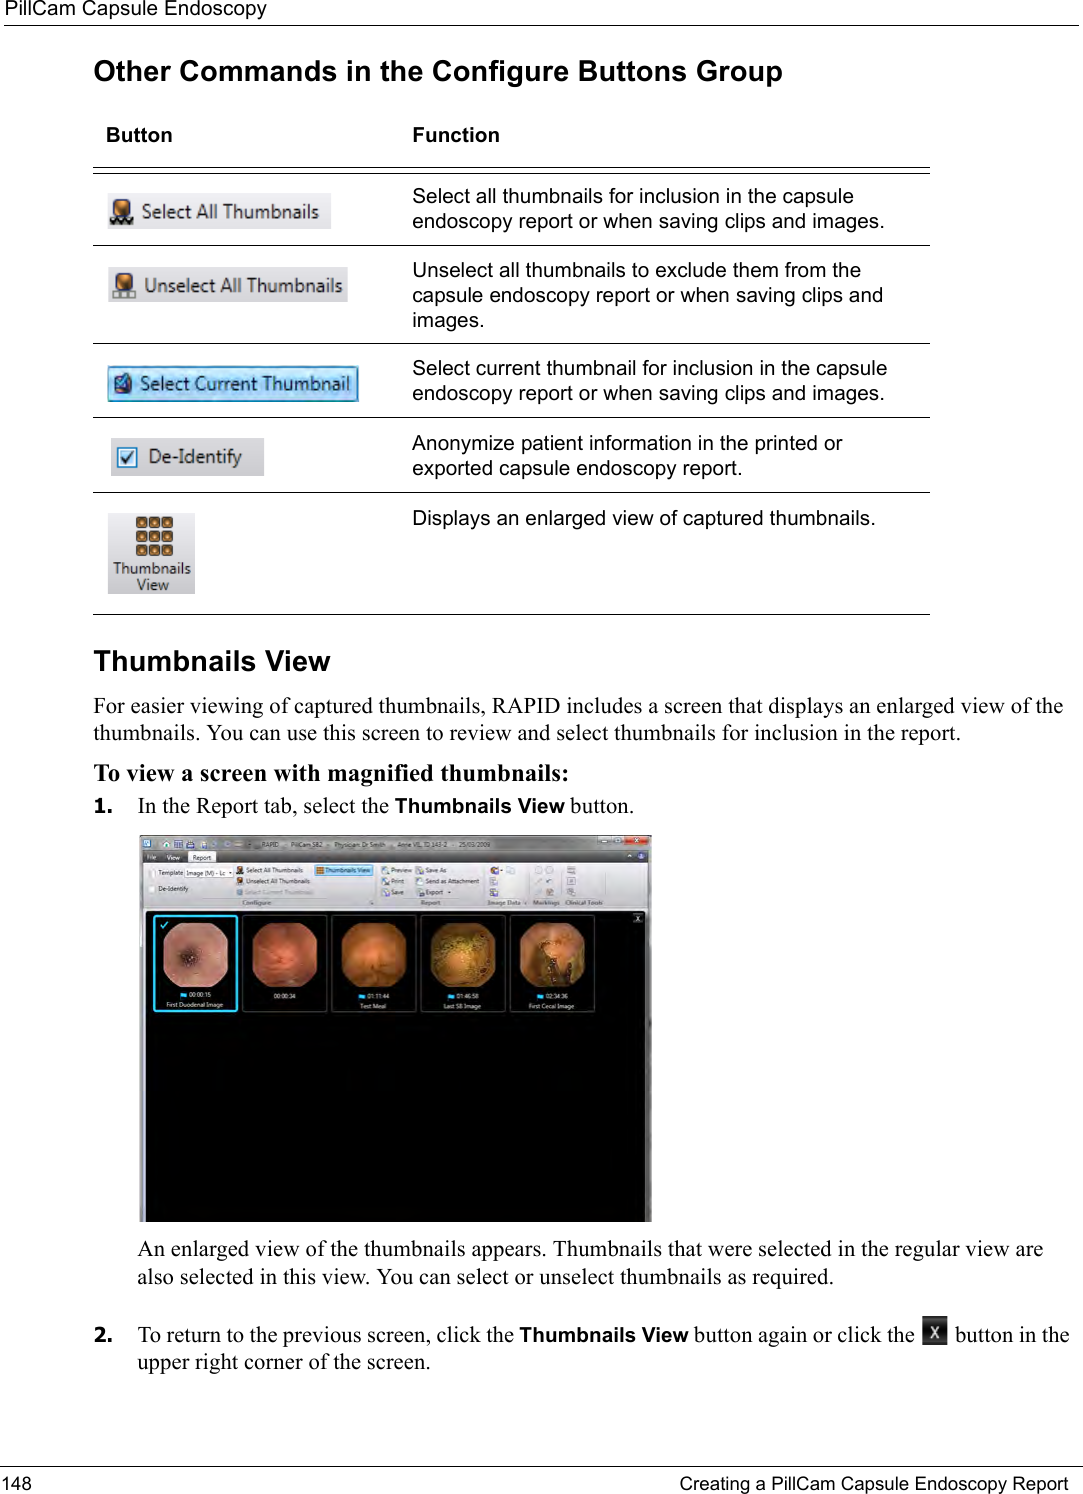 PillCam Capsule Endoscopy148 Creating a PillCam Capsule Endoscopy ReportOther Commands in the Configure Buttons Group Thumbnails ViewFor easier viewing of captured thumbnails, RAPID includes a screen that displays an enlarged view of the thumbnails. You can use this screen to review and select thumbnails for inclusion in the report.To view a screen with magnified thumbnails:1. In the Report tab, select the Thumbnails View button. An enlarged view of the thumbnails appears. Thumbnails that were selected in the regular view are also selected in this view. You can select or unselect thumbnails as required.2. To return to the previous screen, click the Thumbnails View button again or click the   button in the upper right corner of the screen.Button FunctionSelect all thumbnails for inclusion in the capsule endoscopy report or when saving clips and images.Unselect all thumbnails to exclude them from the capsule endoscopy report or when saving clips and images.Select current thumbnail for inclusion in the capsule endoscopy report or when saving clips and images.Anonymize patient information in the printed or exported capsule endoscopy report.Displays an enlarged view of captured thumbnails.